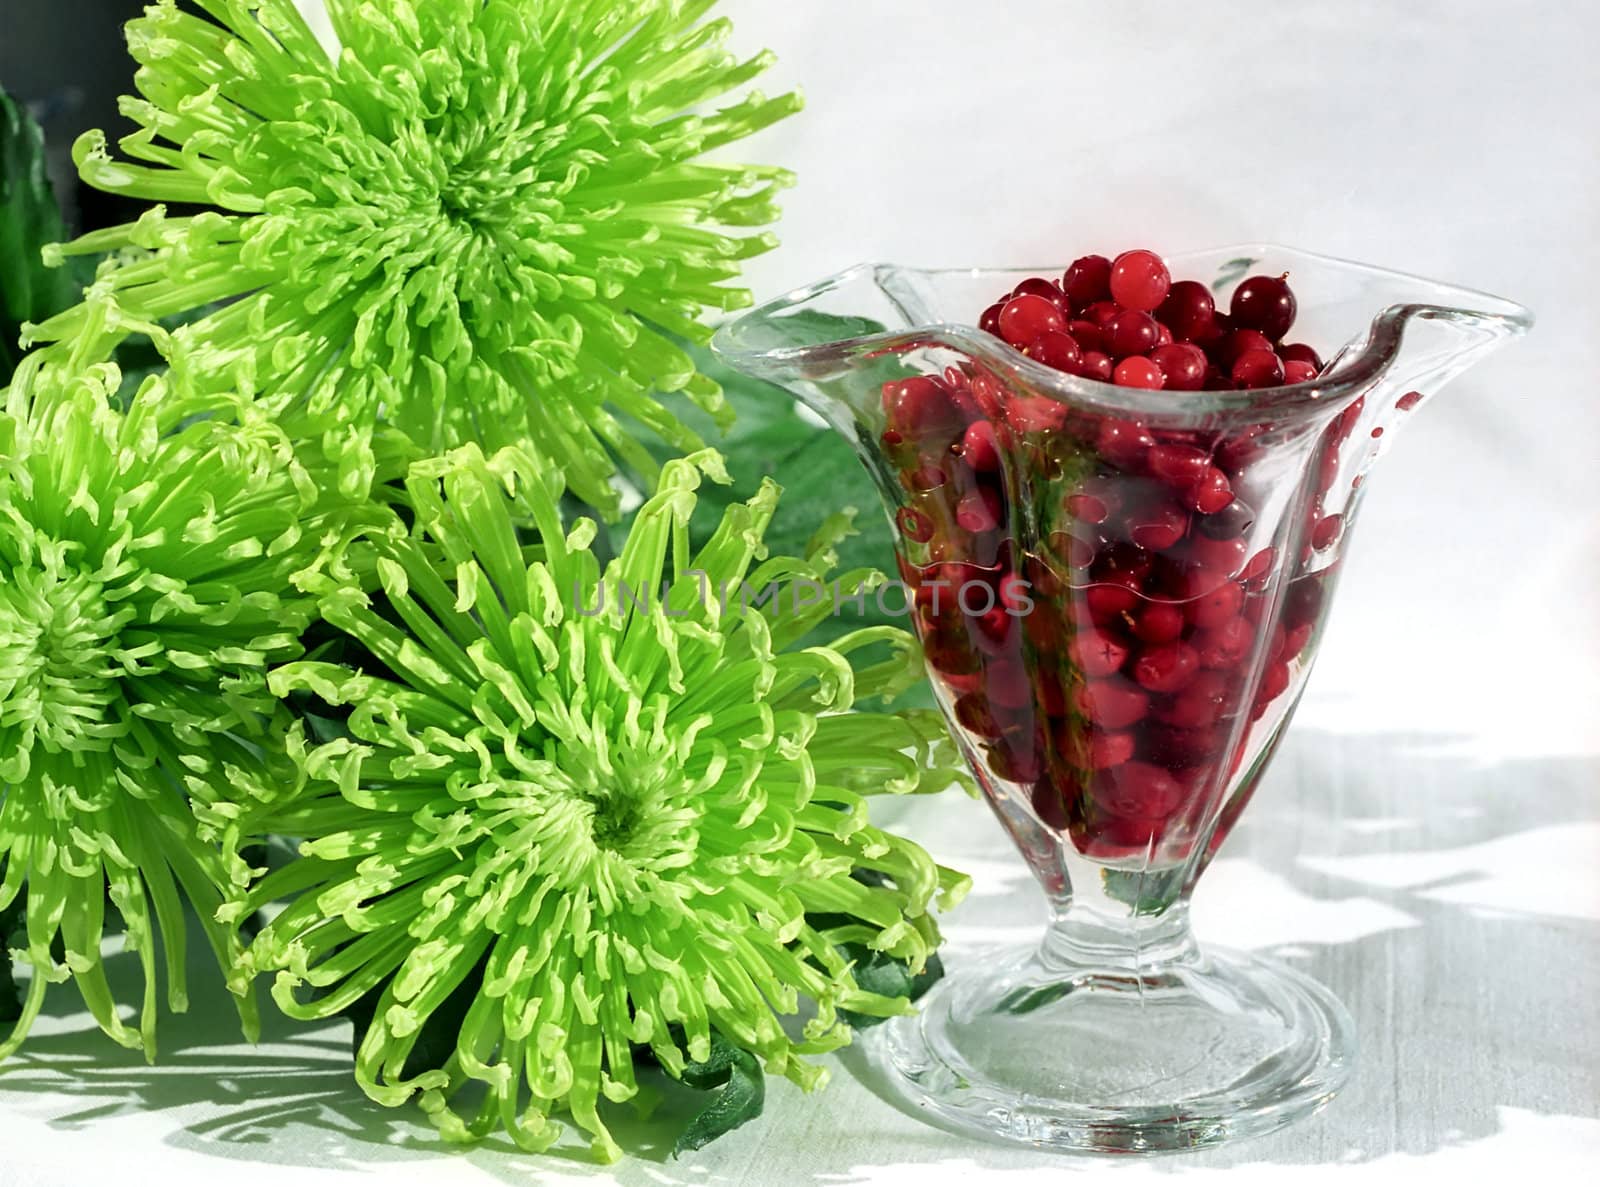 Red berry in glass and green chrysanthemums